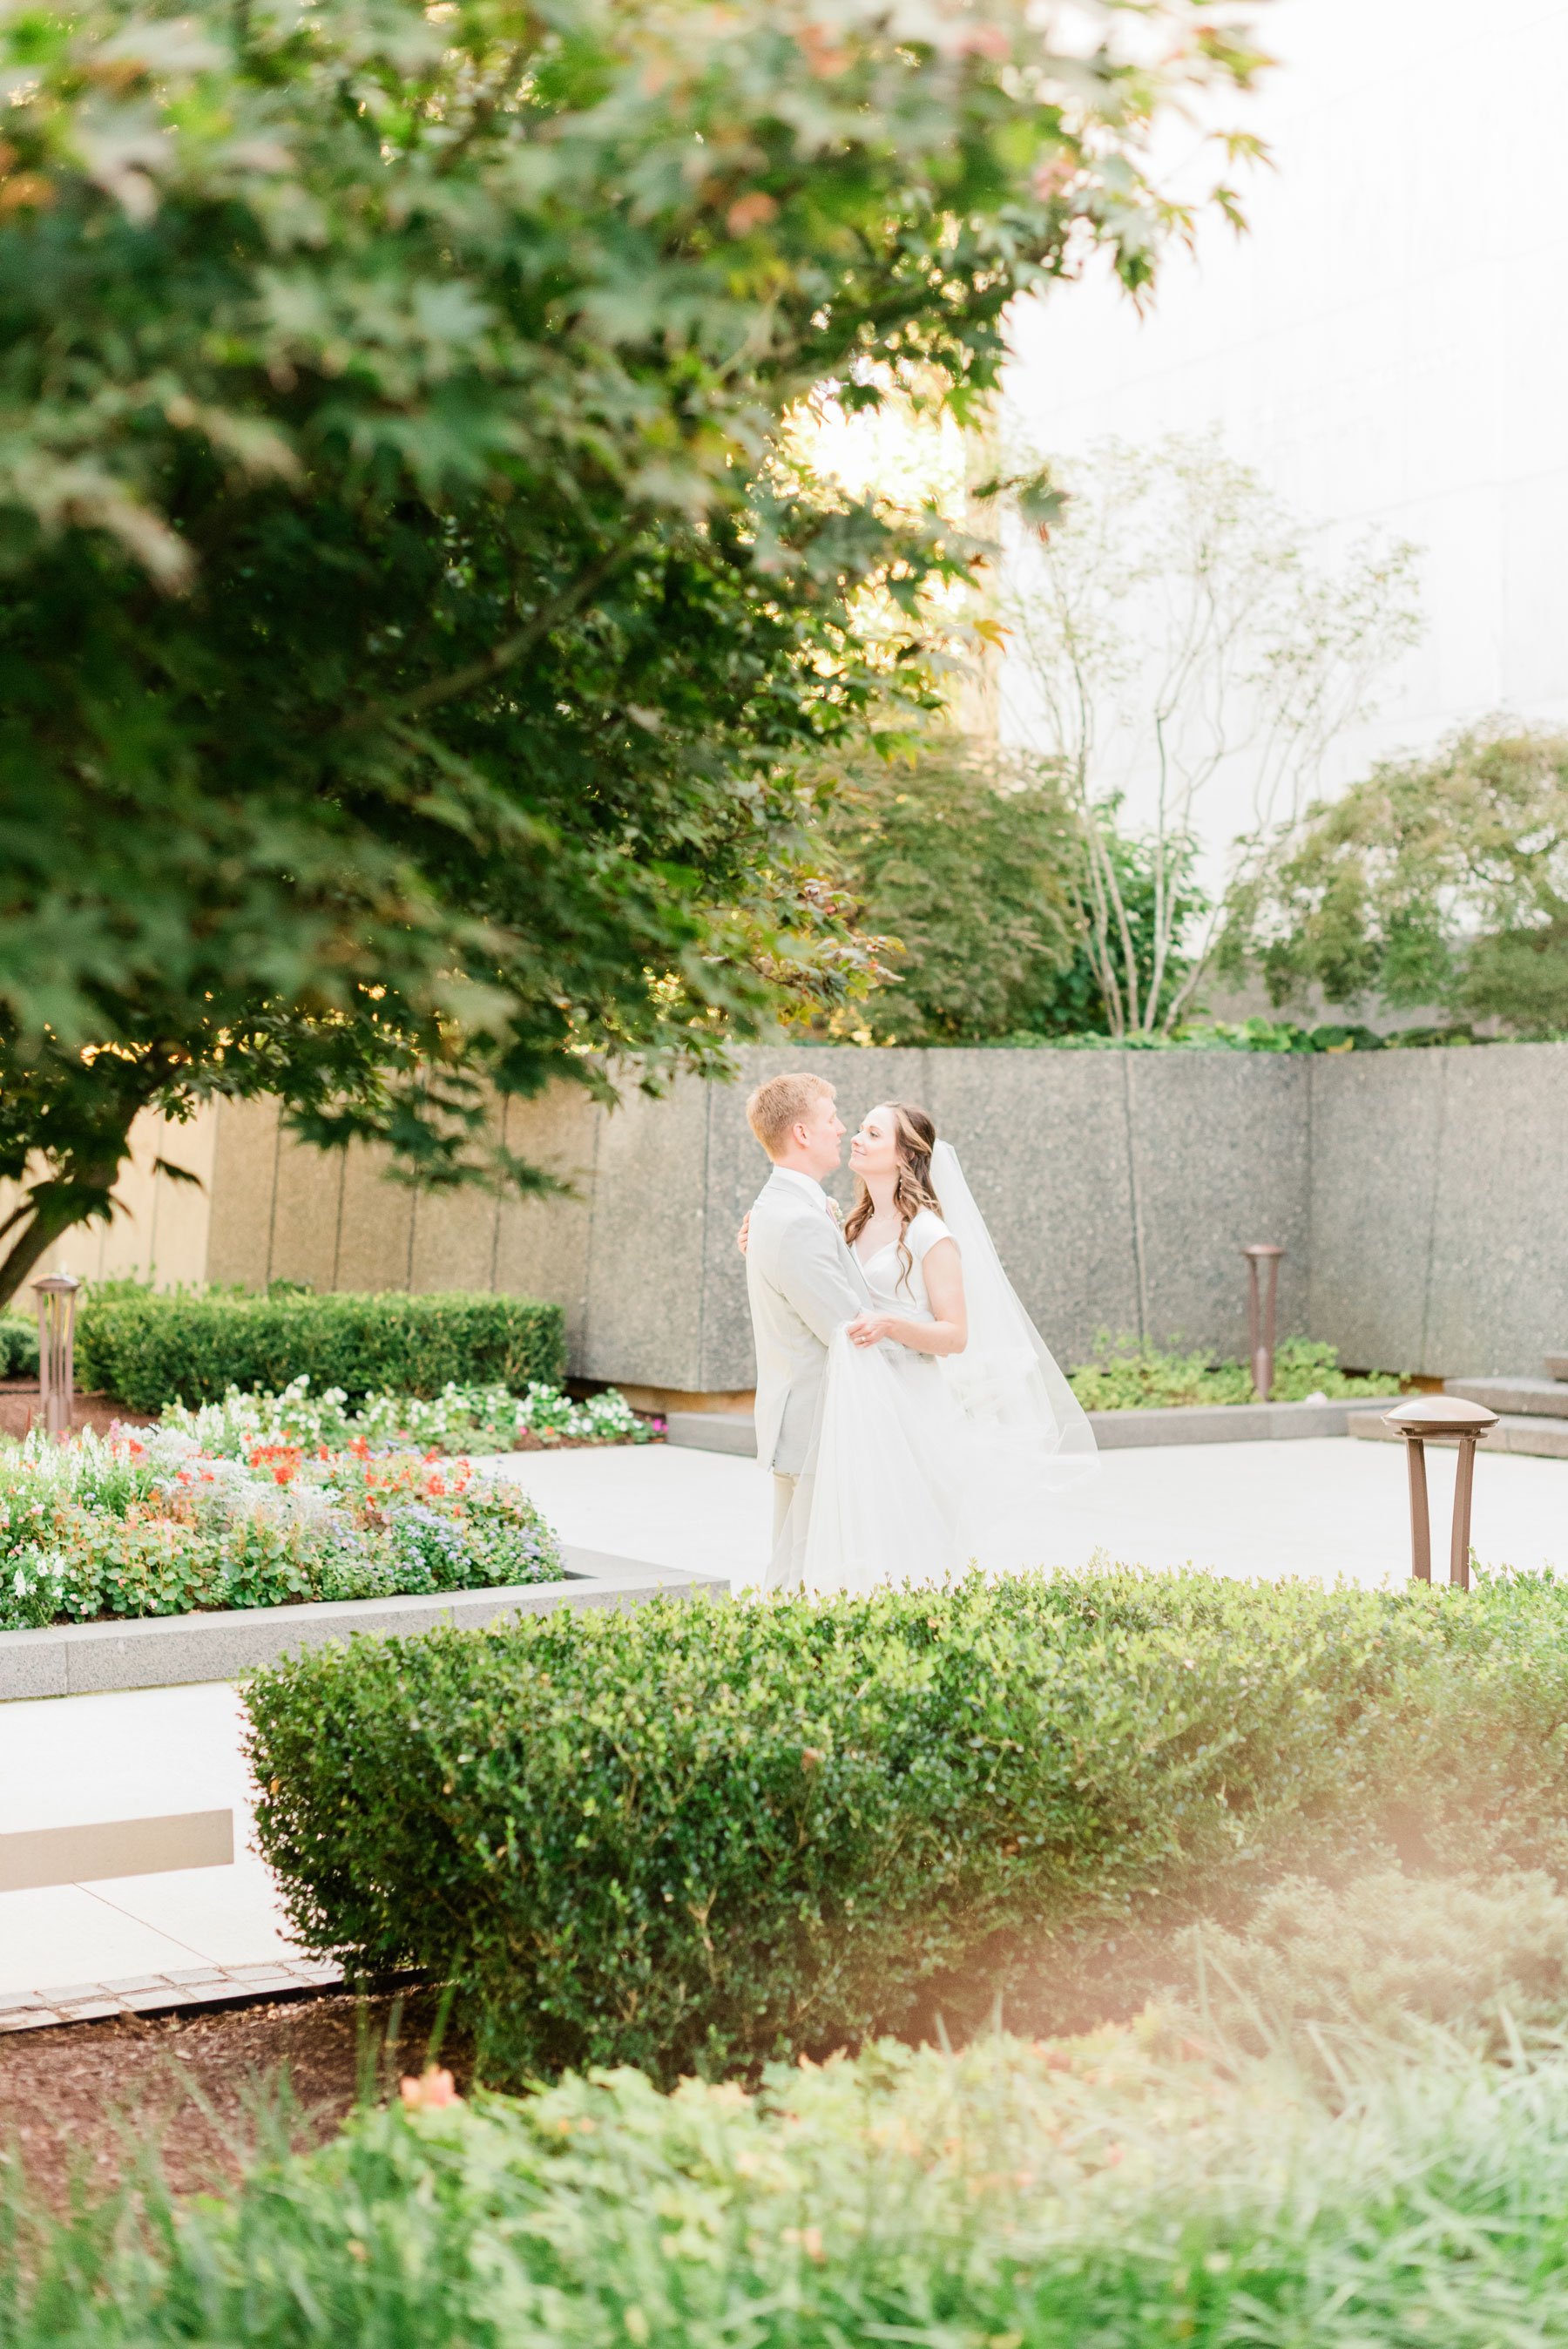    The bride and groom explore the beautiful washington d.c. temple grounds together. #washingtondctemplegrounds #washingtondcweddingphotographer #dcwedding #pinkwedding #ldsweddingphotographer #pinkweddingbouquet #washingtondctempleexit #eastcoastwe